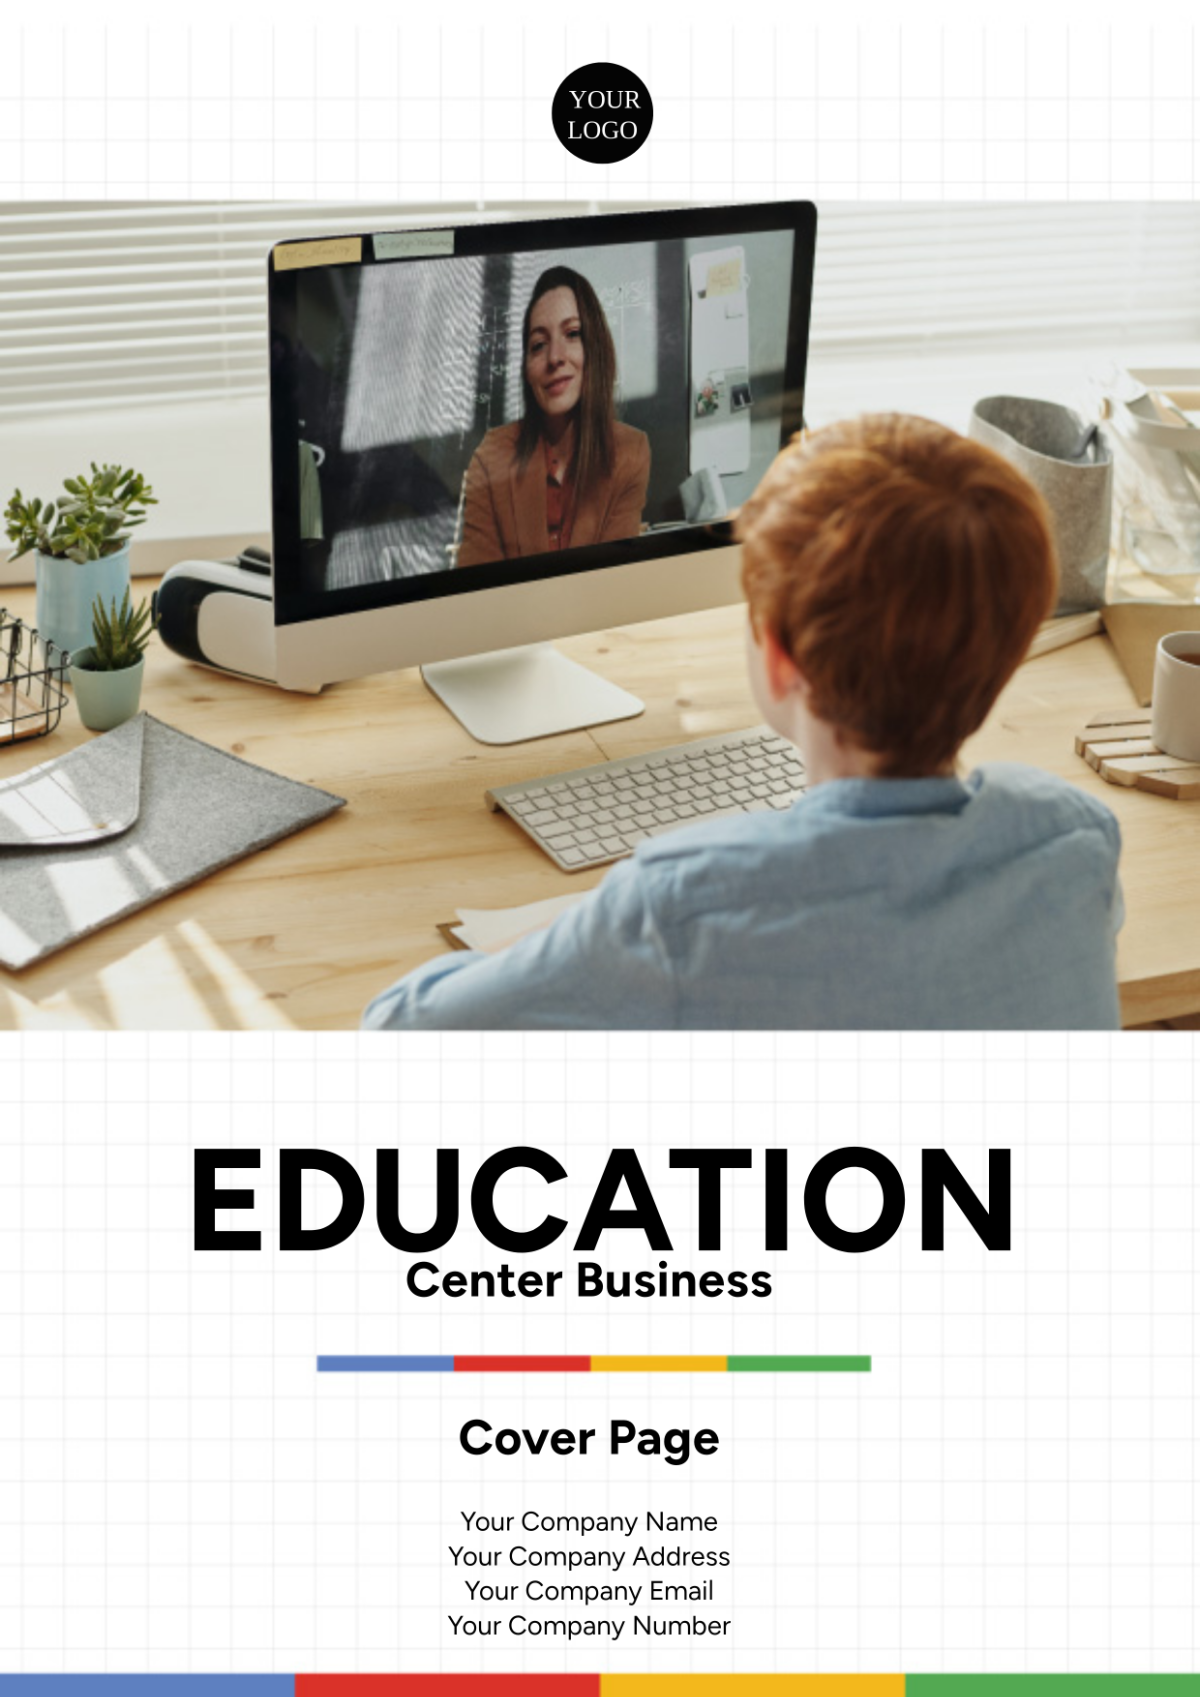 Educational Center Business Cover Page